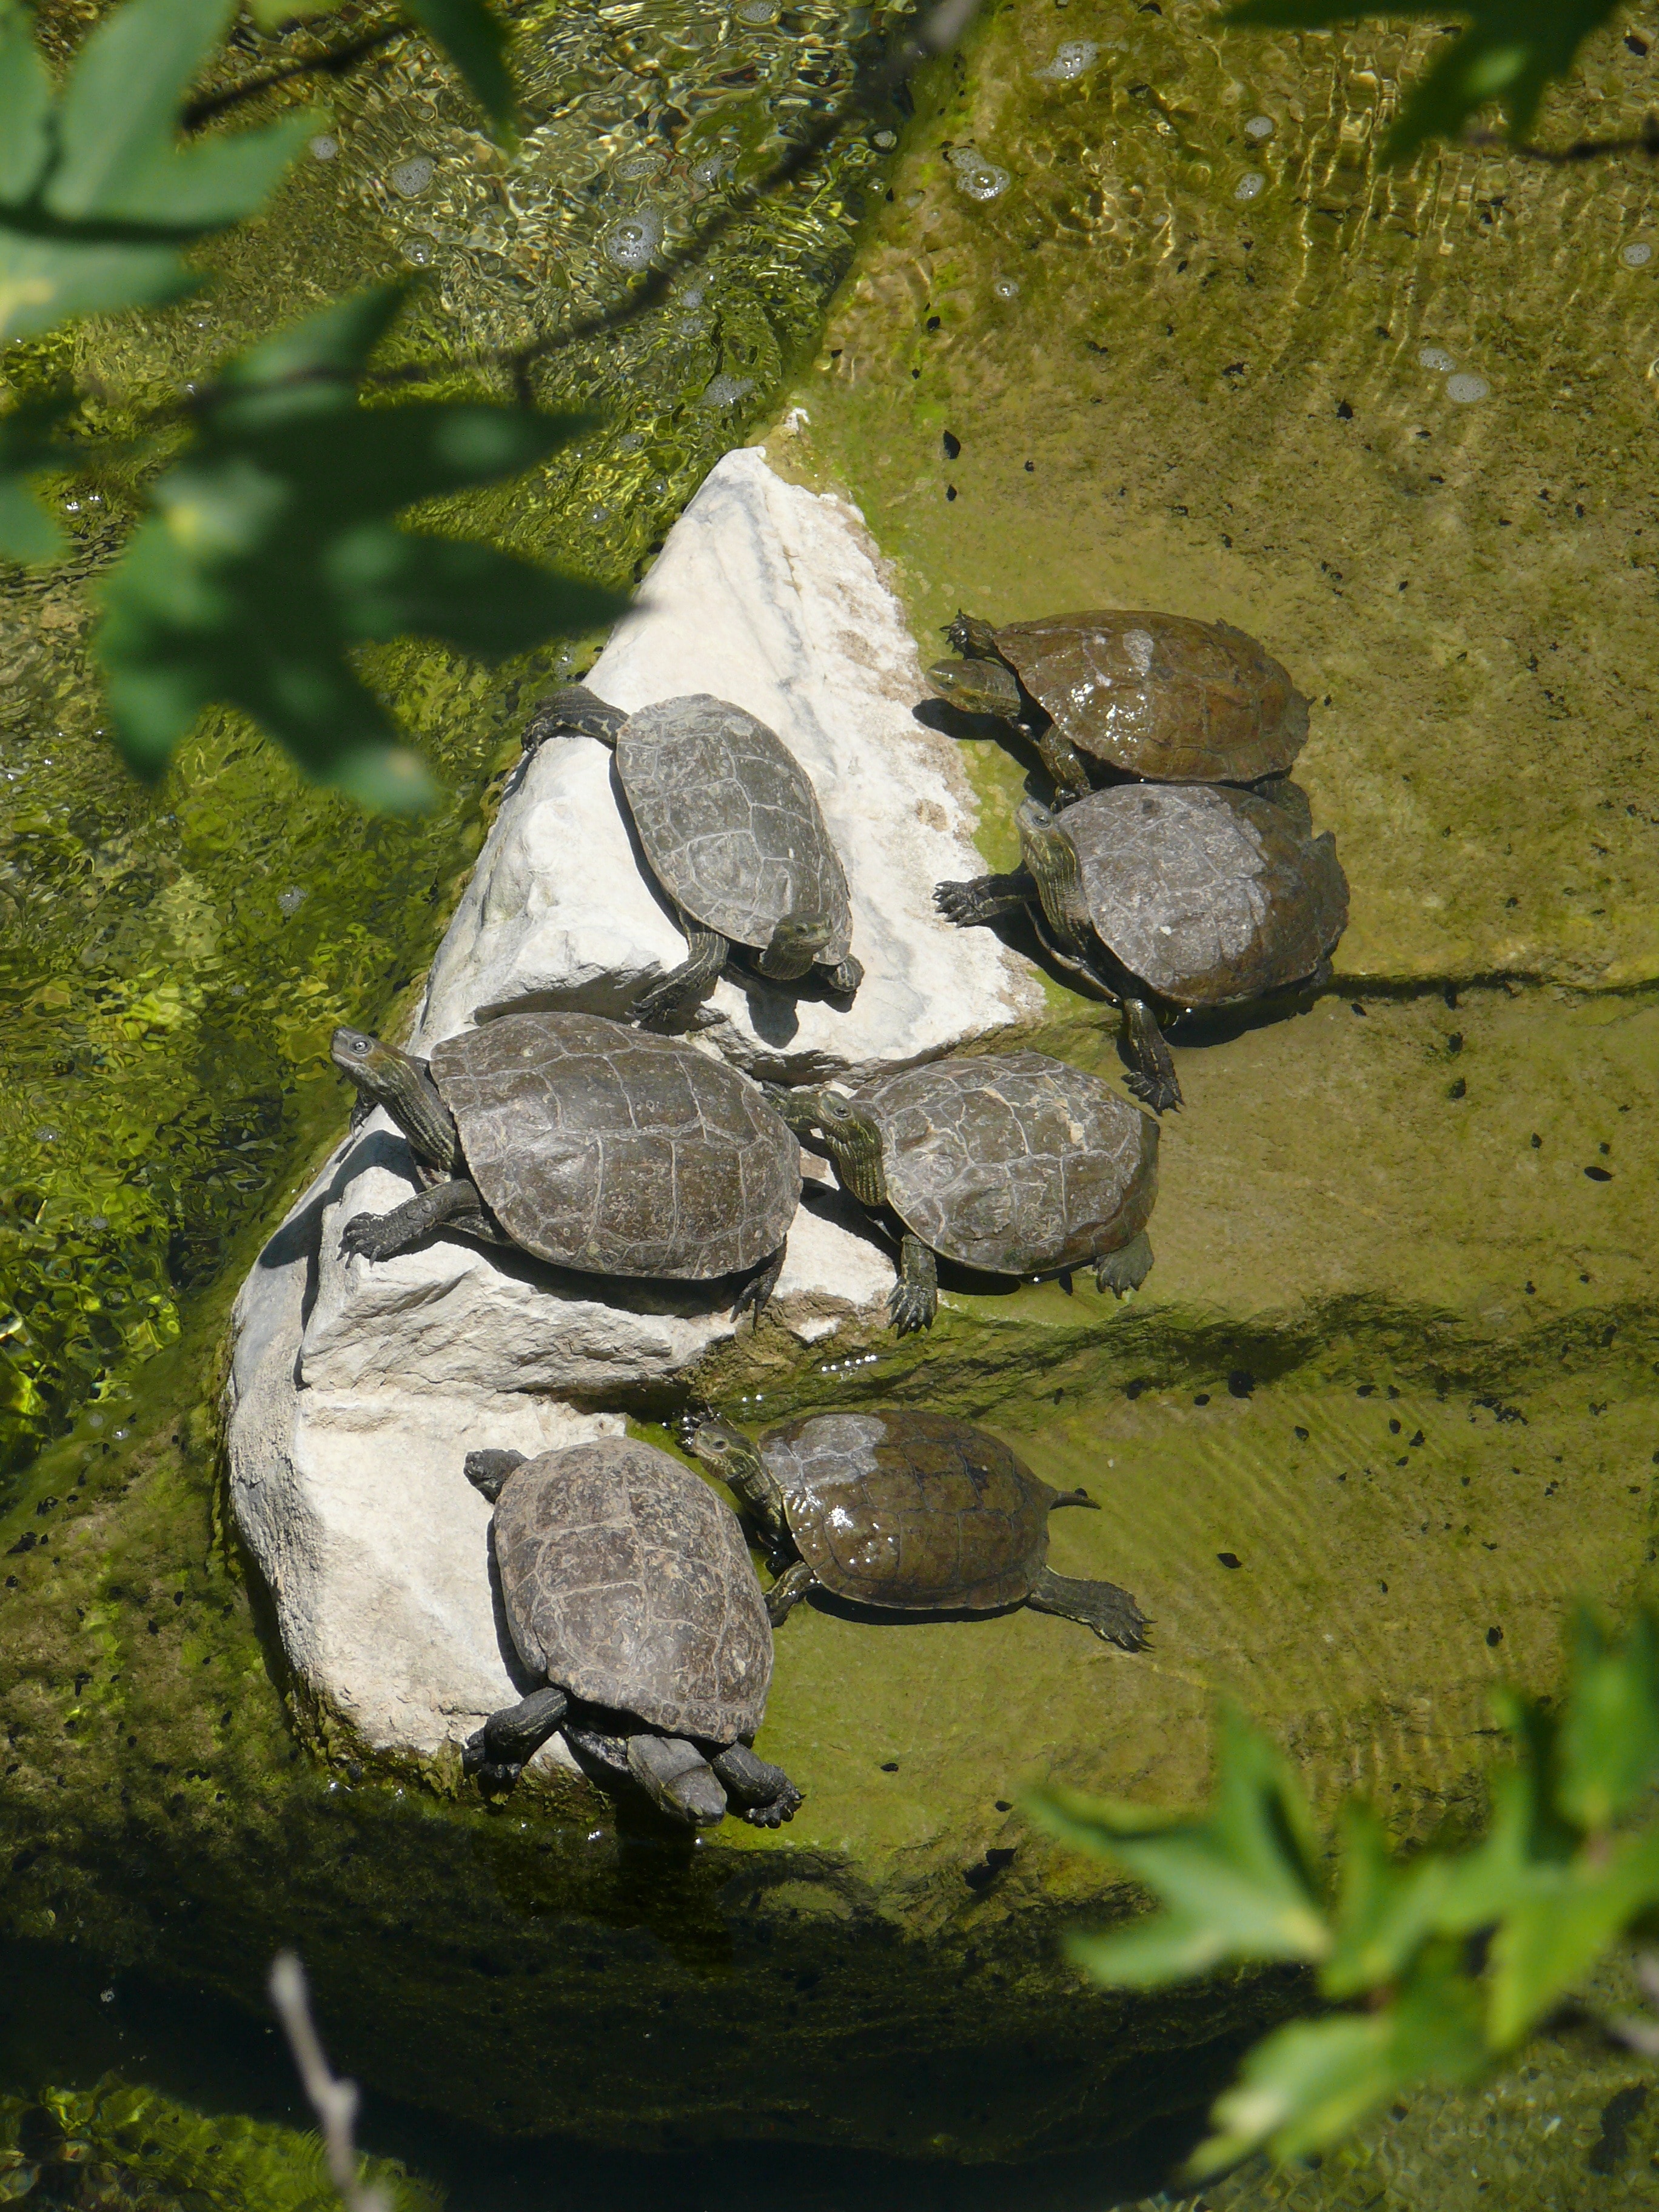 seven gray turtles on body of water during daytime